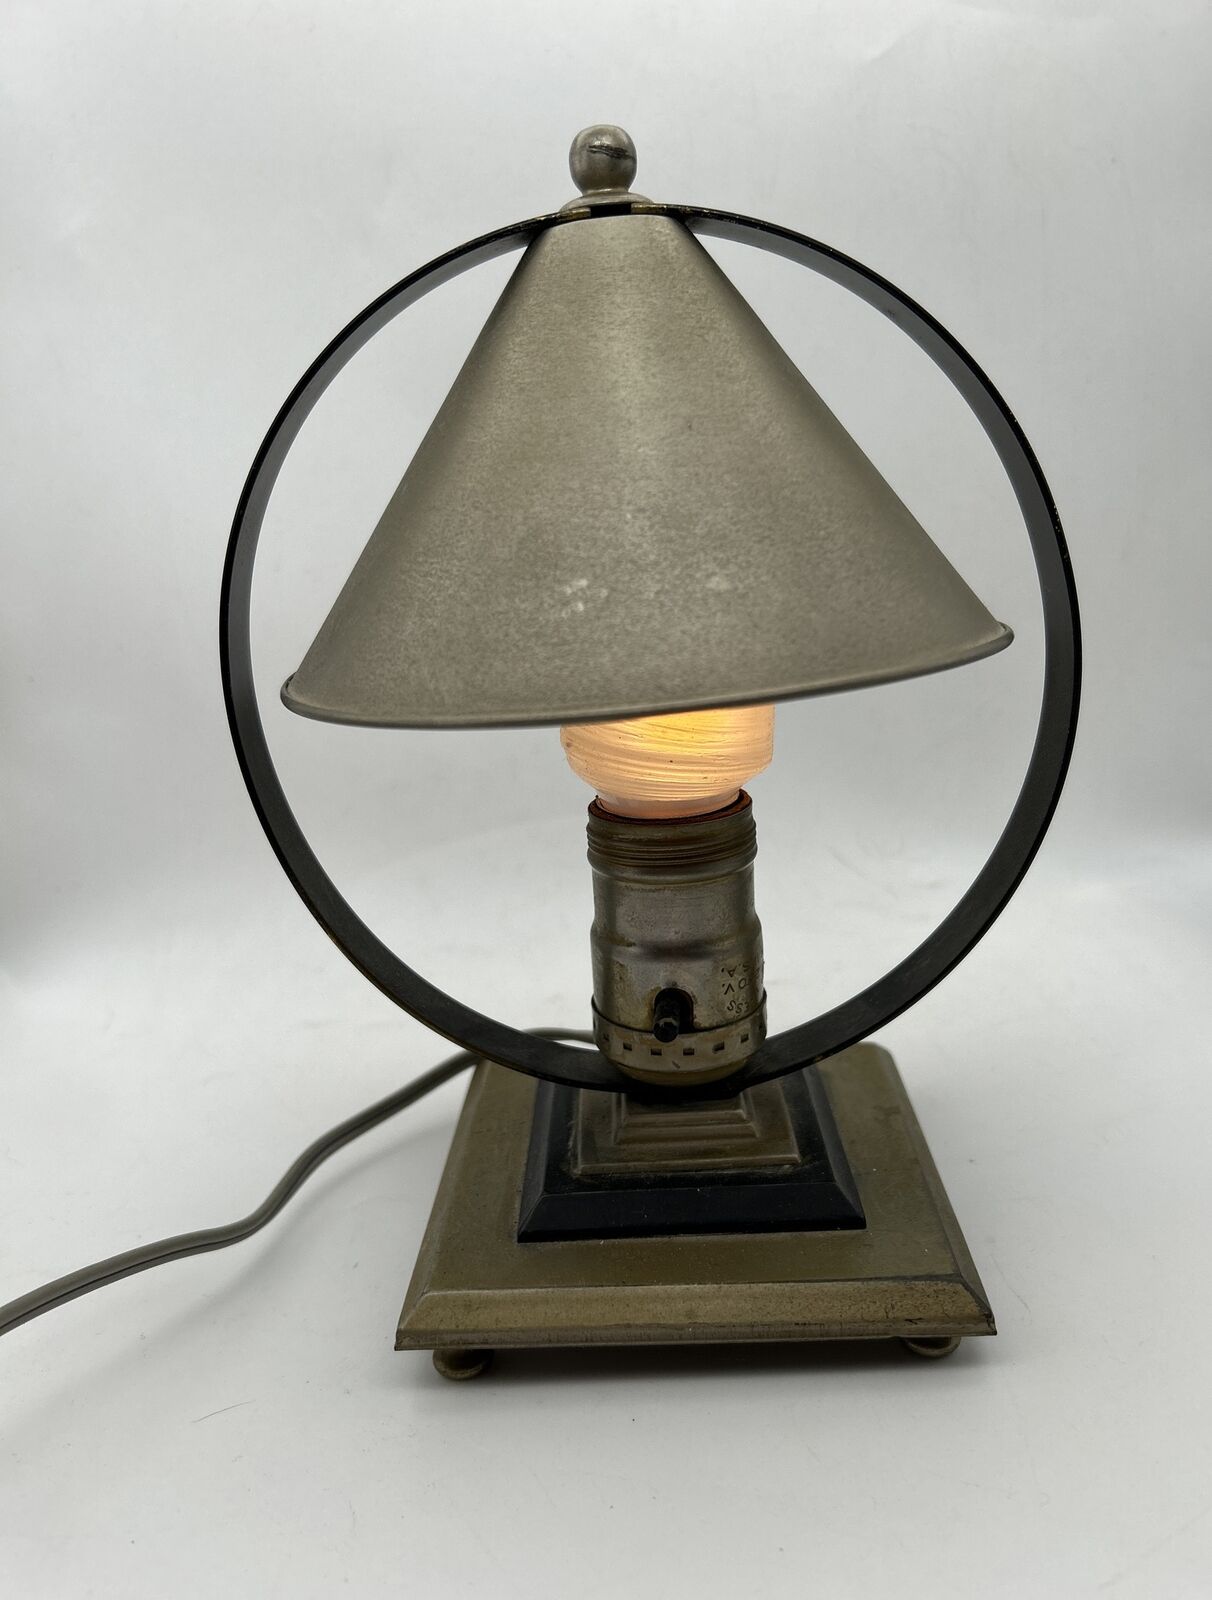 Vintage Art Deco Conical Shade Table Lamp 1930s 8.5” - Works